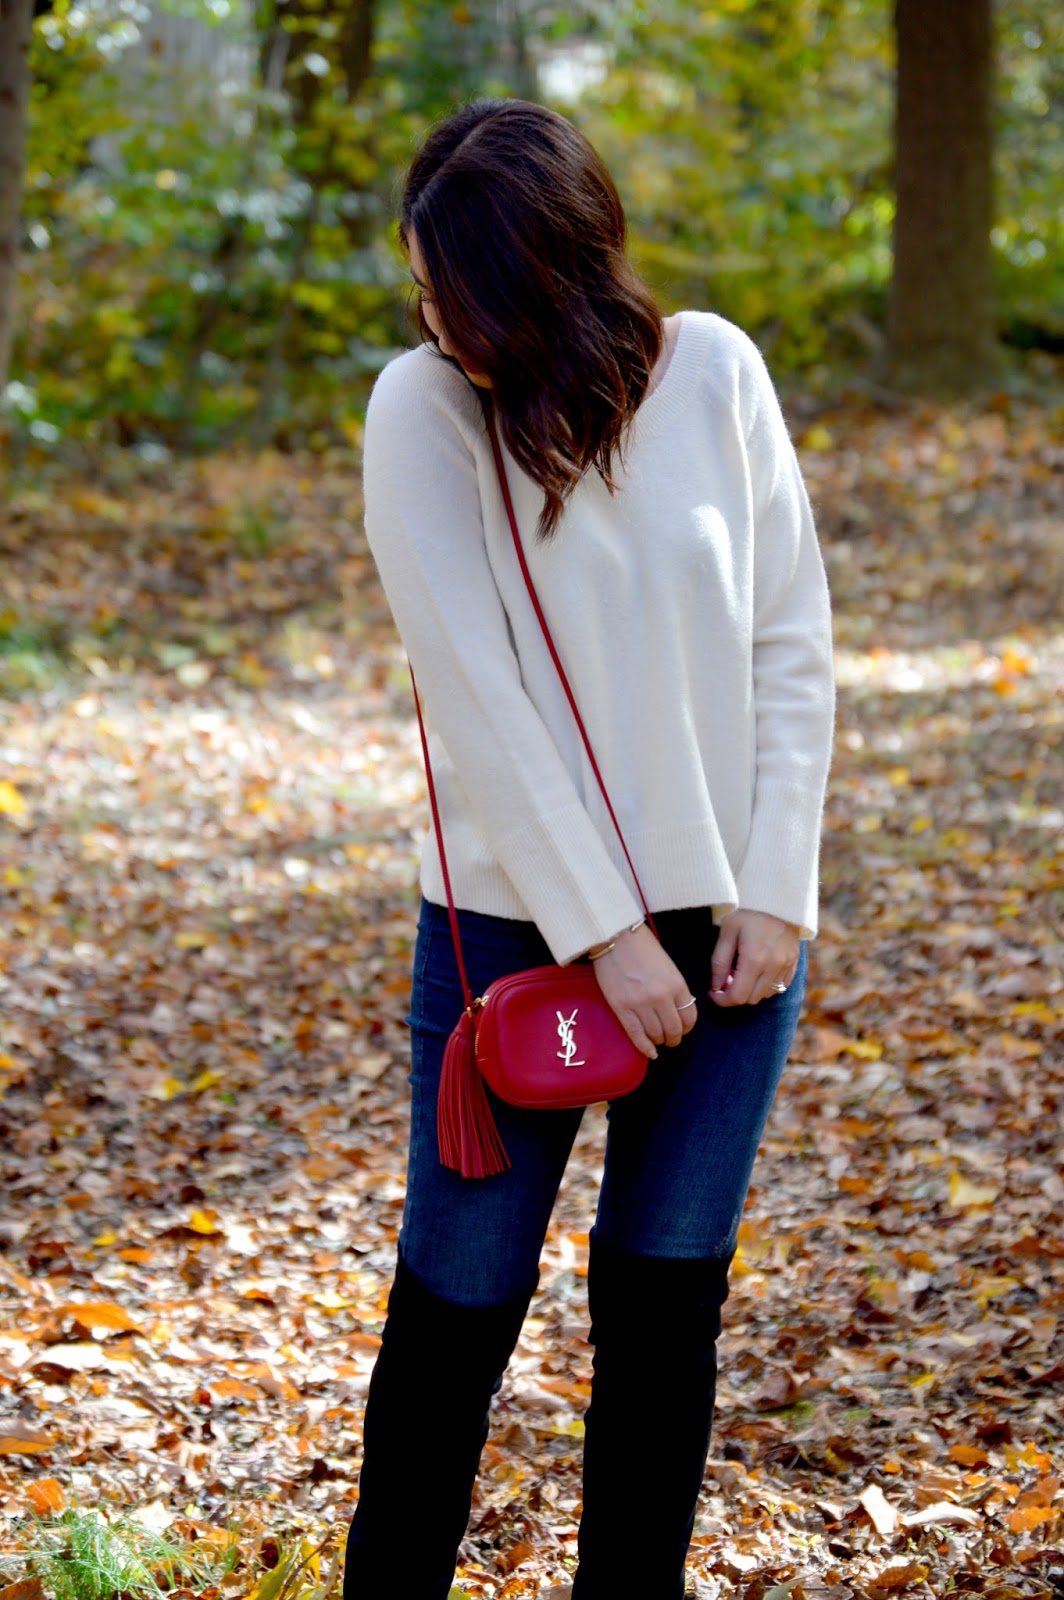 Rosy Outlook: Velvet Bow + Fashion Frenzy Link-Up!